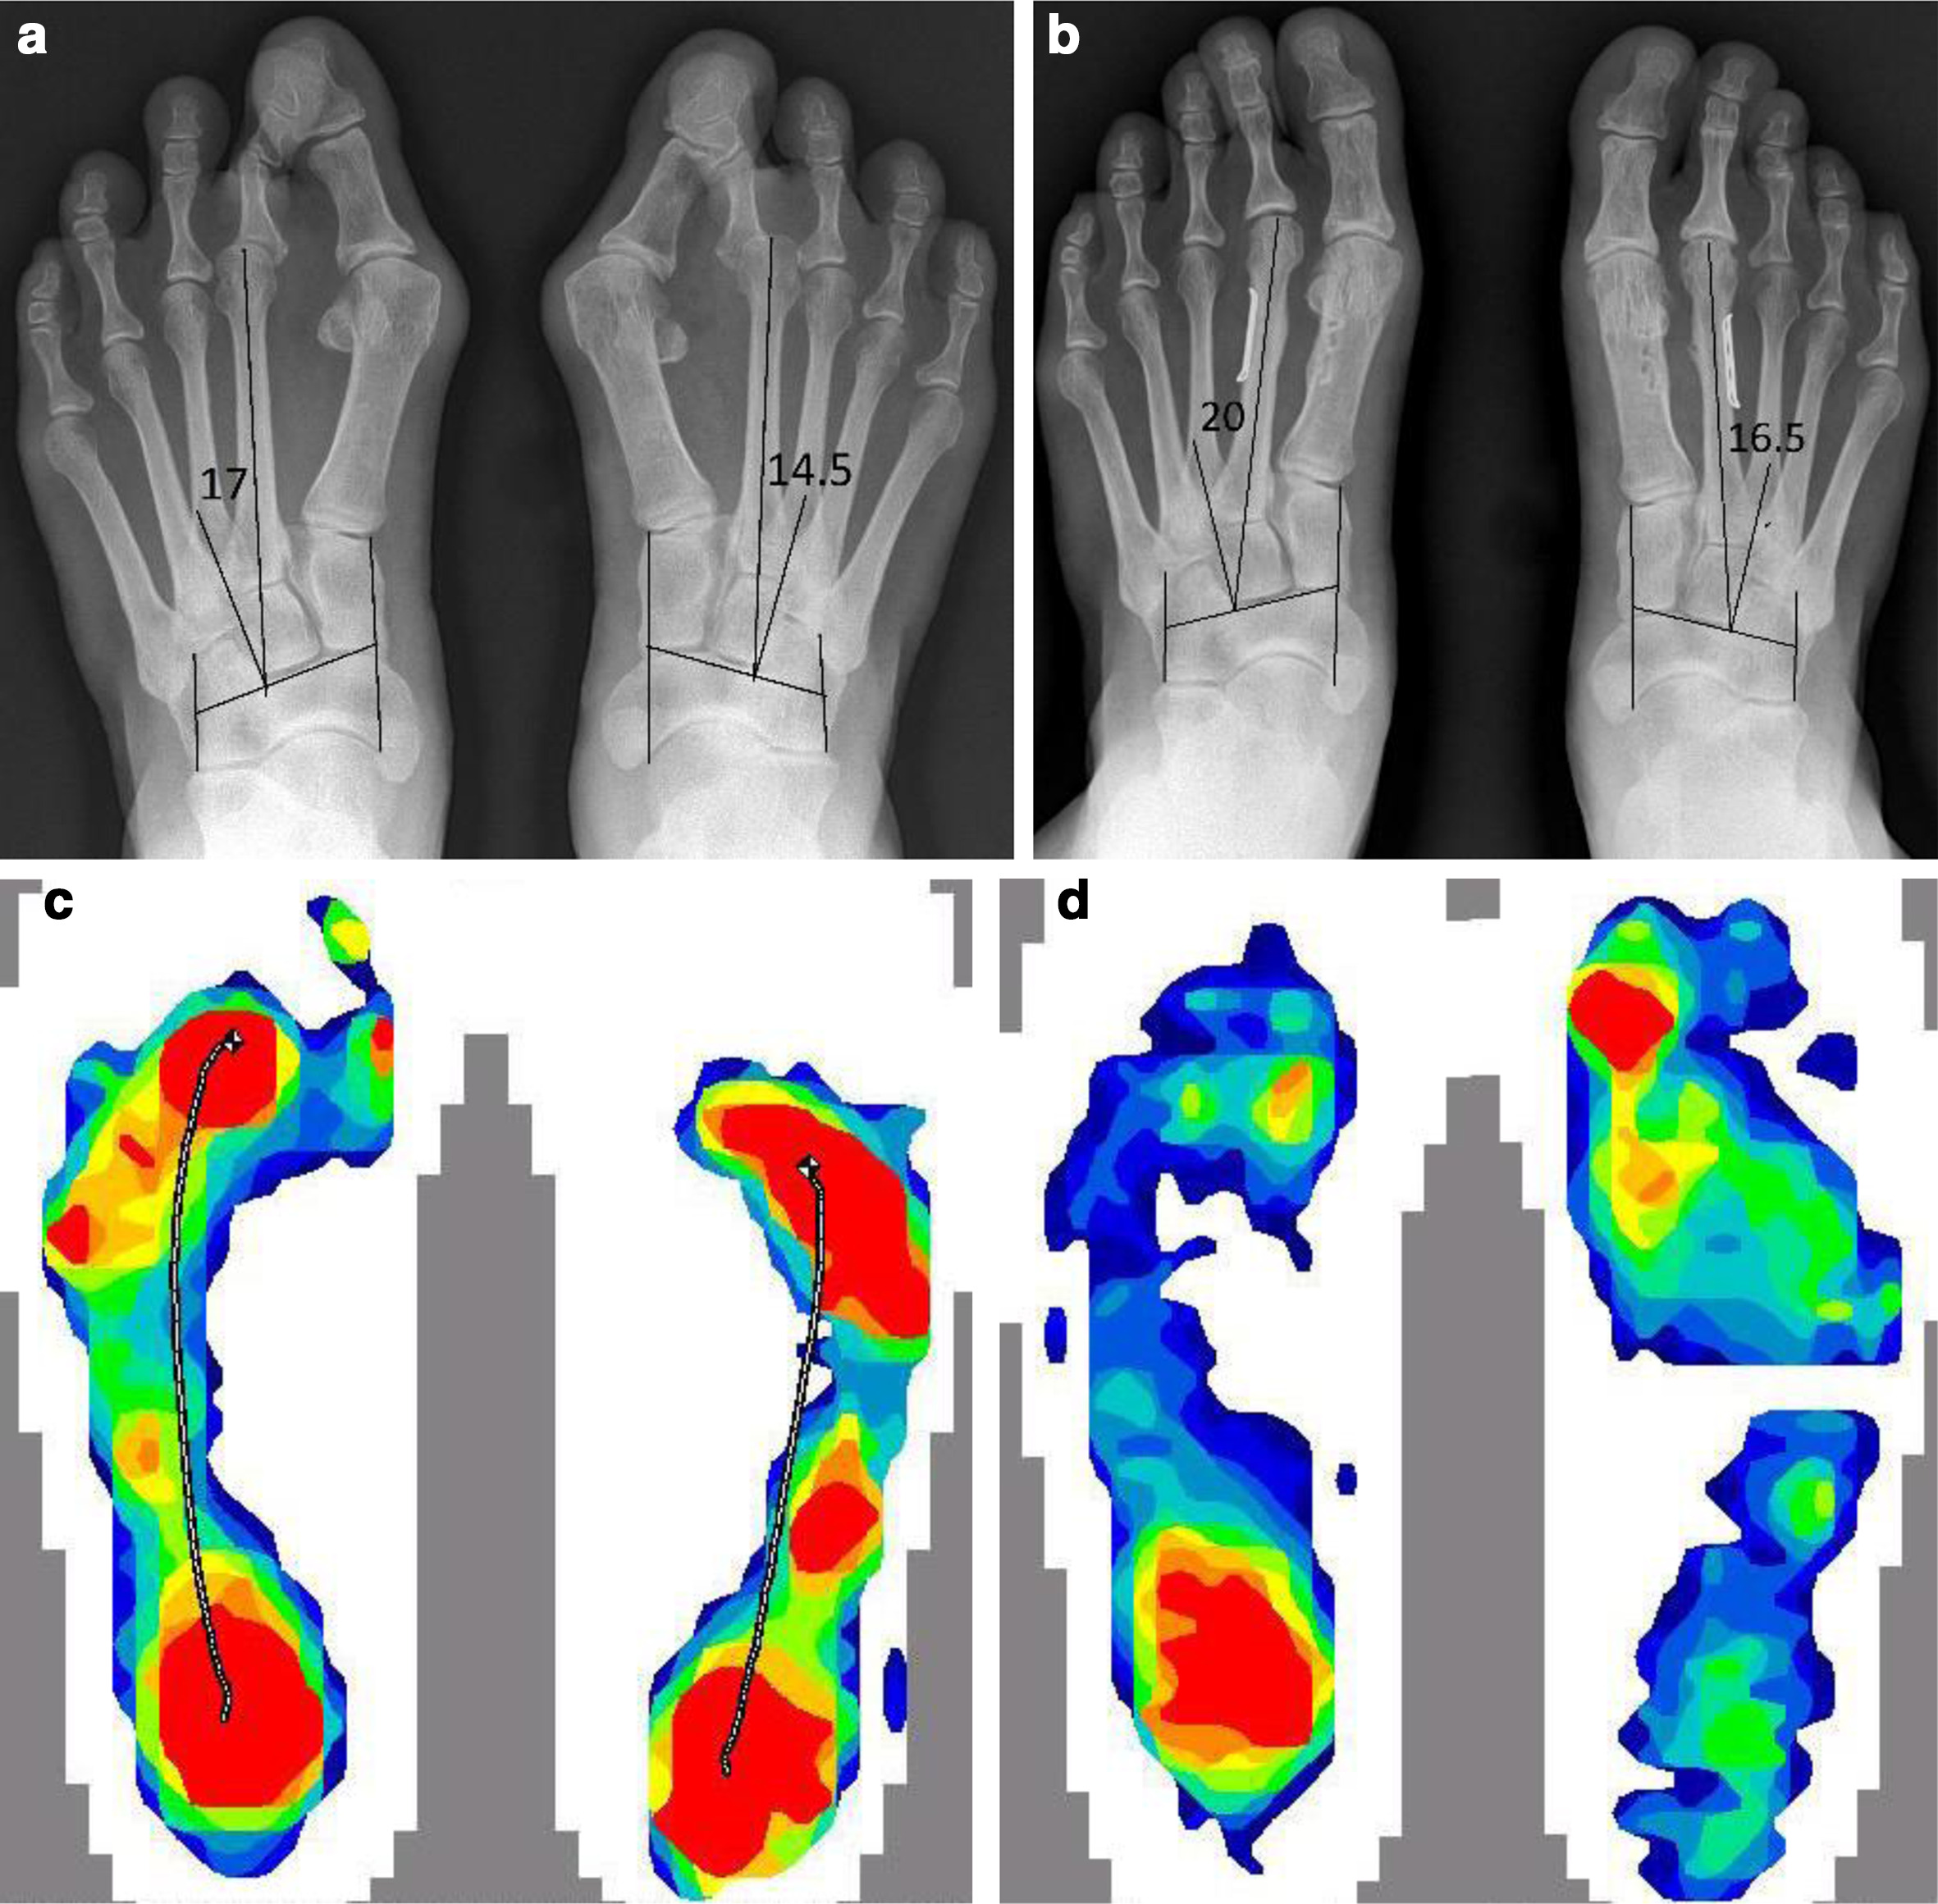 Fig. 4 
          a) Preoperative standing radiograph of a 55-year-old femalewith bilateral severe hallux valgus deformity Sgarlato’s metatarsus adductus angle (SMAA) 17° and 14.5°, intermetatarsal angle (IMA) 17.8° and 19.3°, and metatarsophalangeal angle (MPA) 35.6° and 48.1° of her left and right foot respectively. There was also overlapping toes with both second metatarsophalangeal joint (MPJ) dorsally subluxated. b) Her two-year postoperative standing radiograph showed the SMAA was 20° and 16.5°, IMA 7.2°and 6.3°, and MPA 19.9° and 13.7° of her left and right foot respectively. Both overlapping toes deformity and subluxated second MPJs were reduced and maintained. Preoperative metatarsosesamoid dissociation was also much improved. Both metatarsophalangeal joints and metatarsocuneiform joints’ congruences were improved. There was increased 2-3 intermetatarsal space from Figure 4a. c) Her preoperative pedobarographic study by F-scan revealed that most plantar force concentrated under midmetatarsal heads (red) during walking instead of the first ray (first metatarsal head and hallux) of normal feet. d) Her two-year postoperative pedobarographic F-scan revealed reduced mid metatarsal pressure bearing and increased first ray function.
          
        